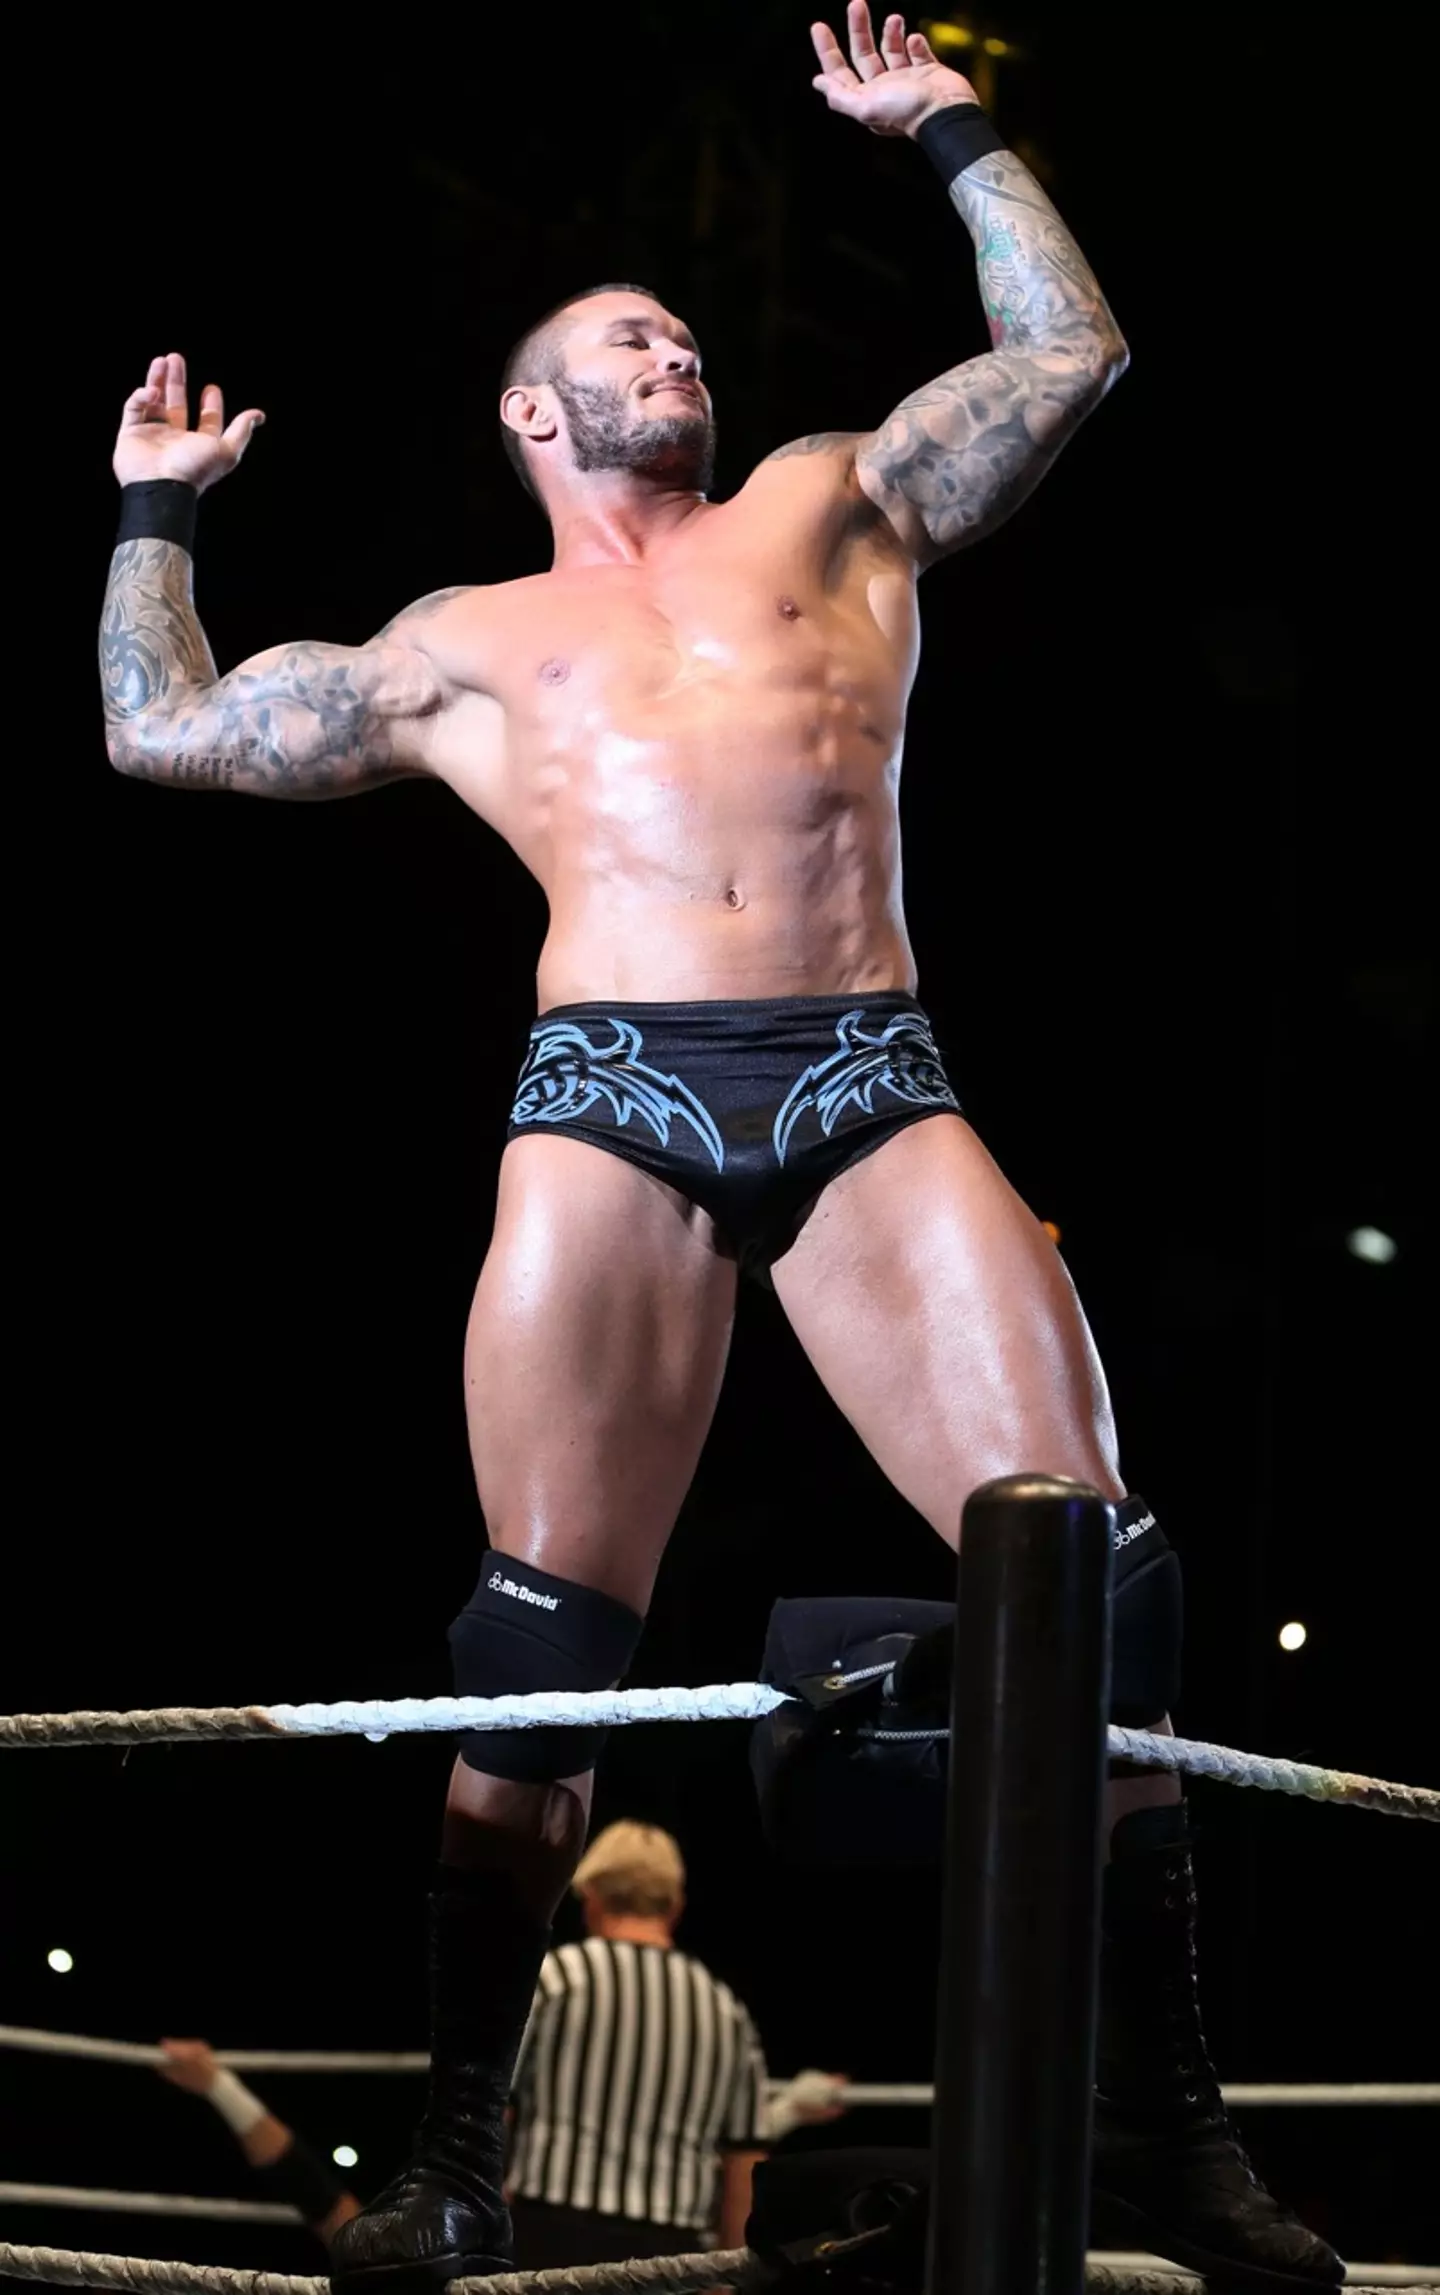 Randy Orton could return to the WWE despite being told not to, according to his father.